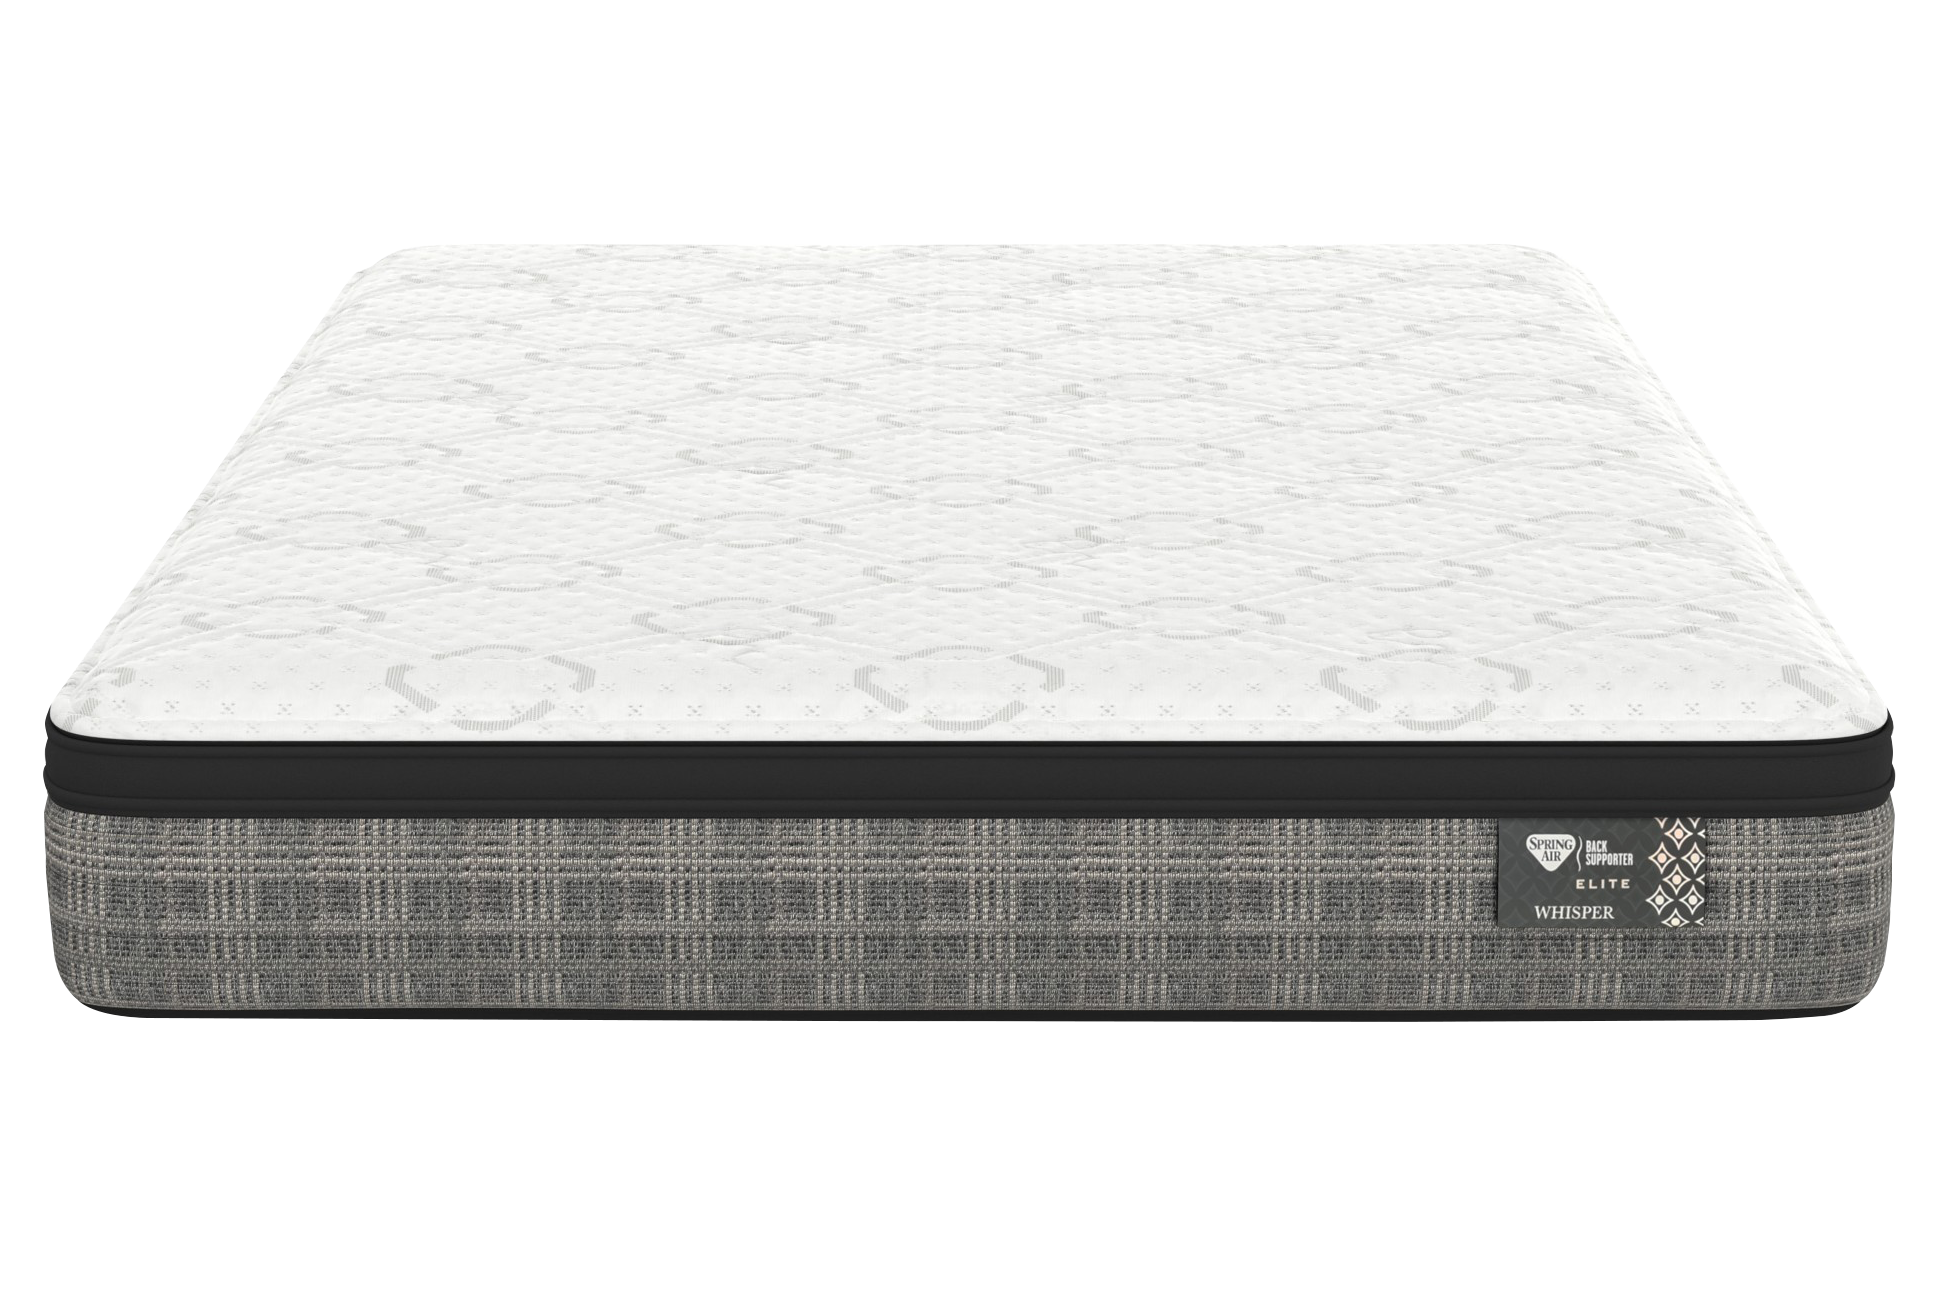 Whisper Mattress - Mcleary's Canadian Made Quality Furniture